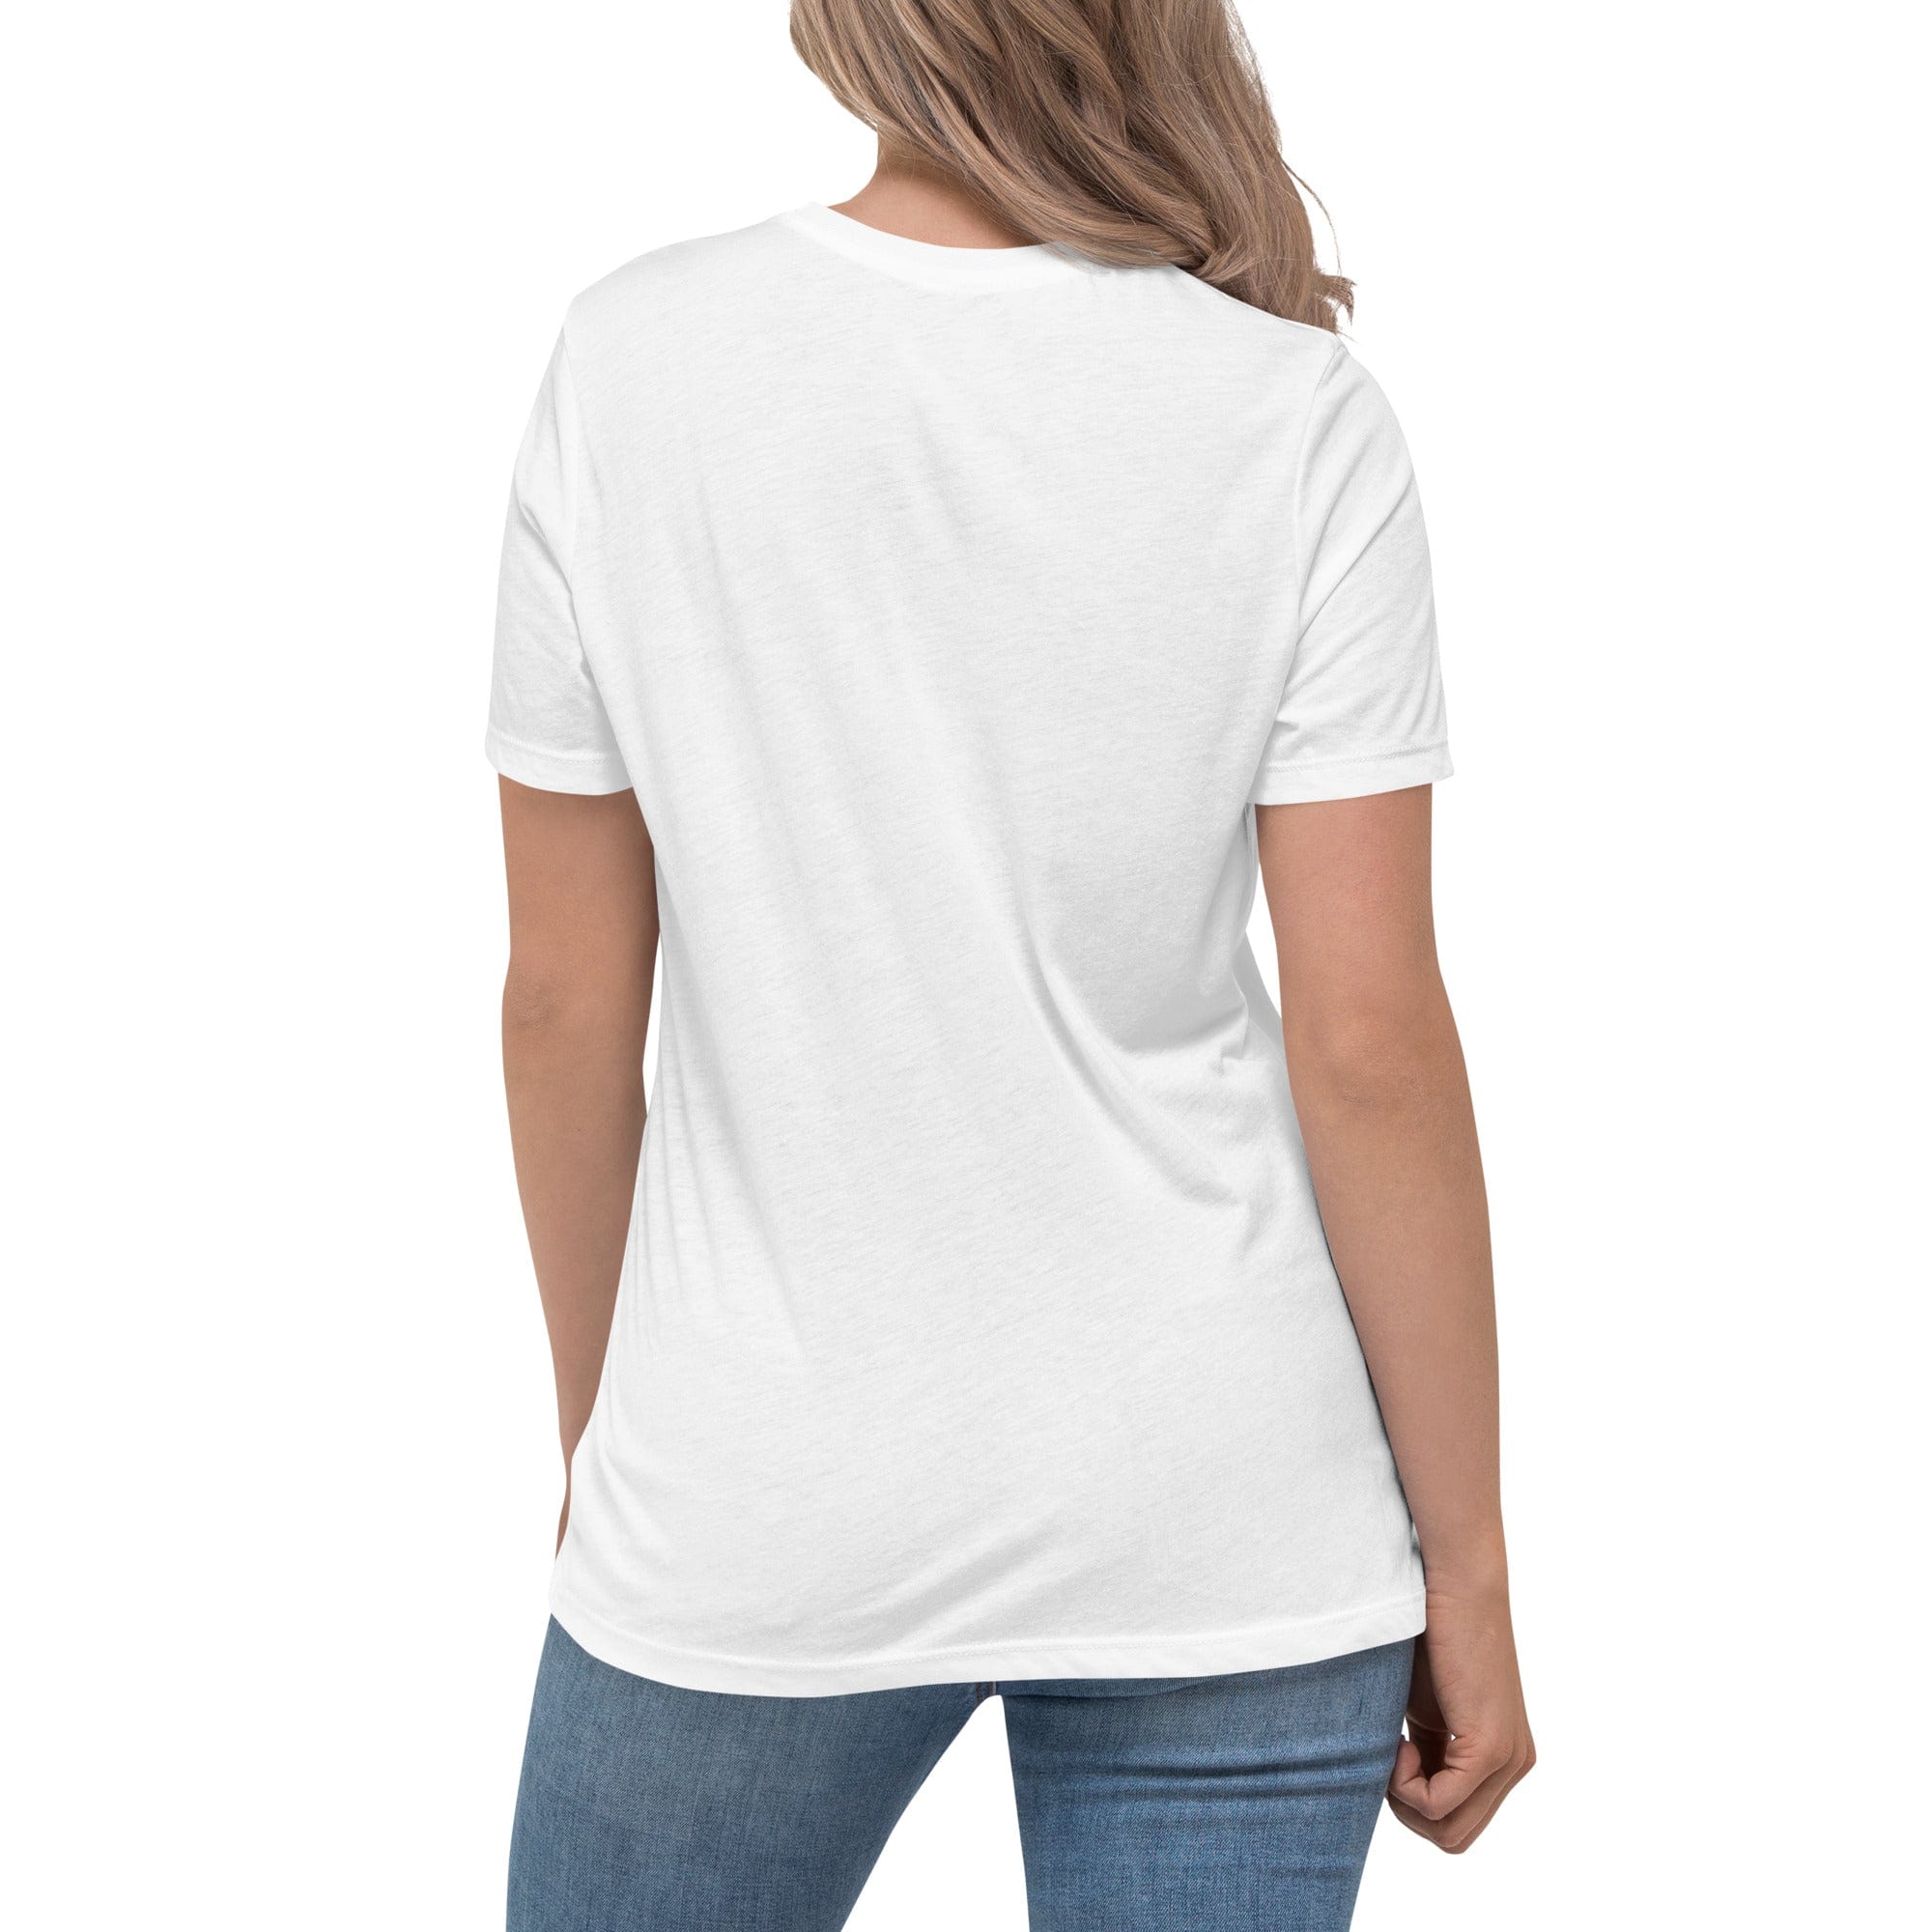 Spruced Roost Surfs Up - Women's Relaxed T-Shirt - S-3XL